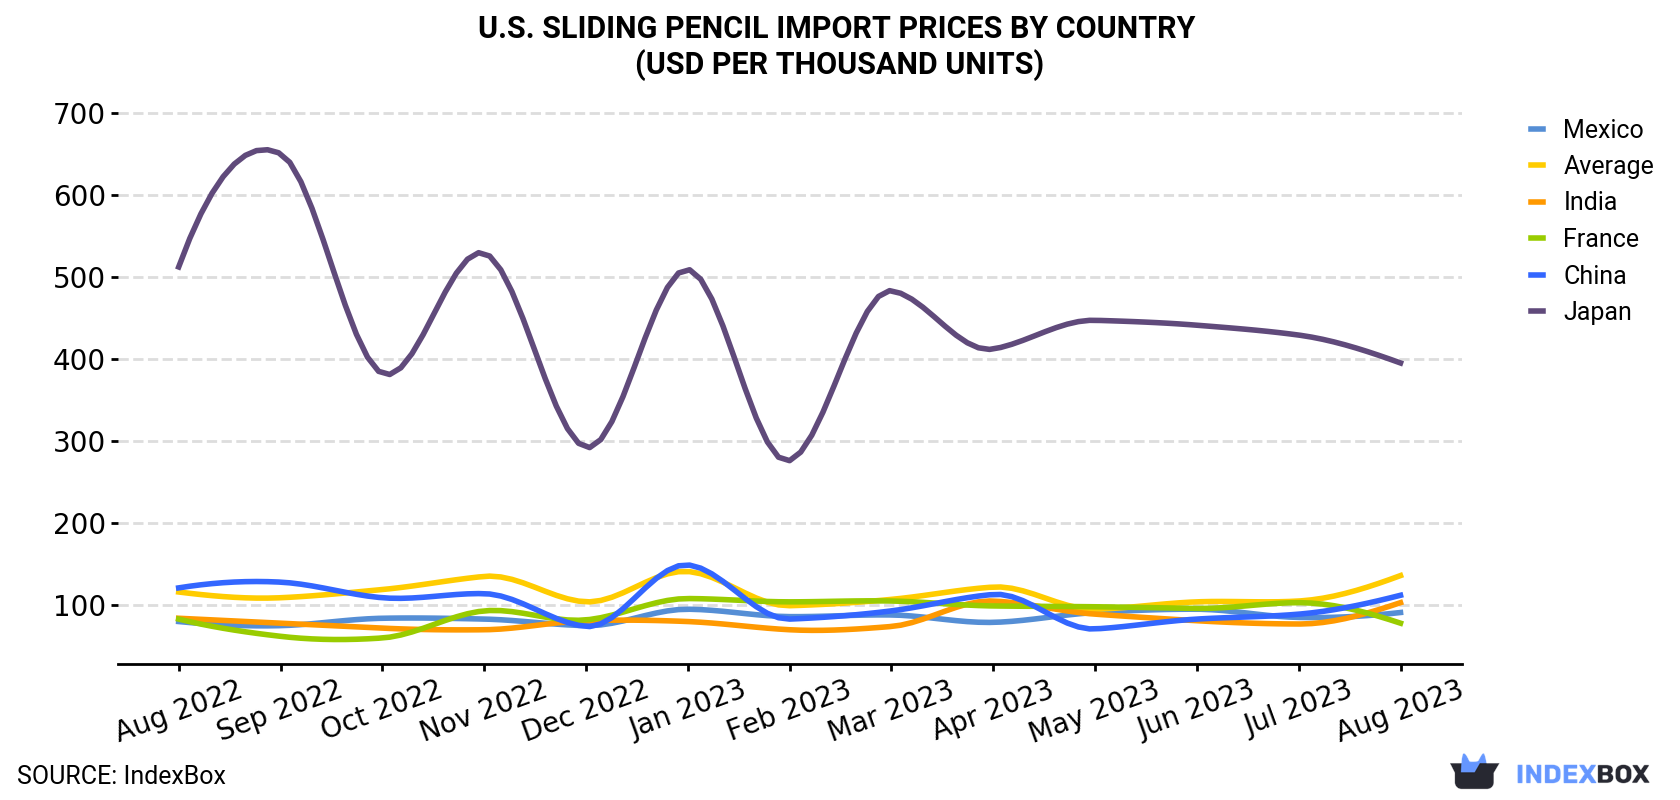 U.S. Sliding Pencil Import Prices By Country (USD Per Thousand Units)